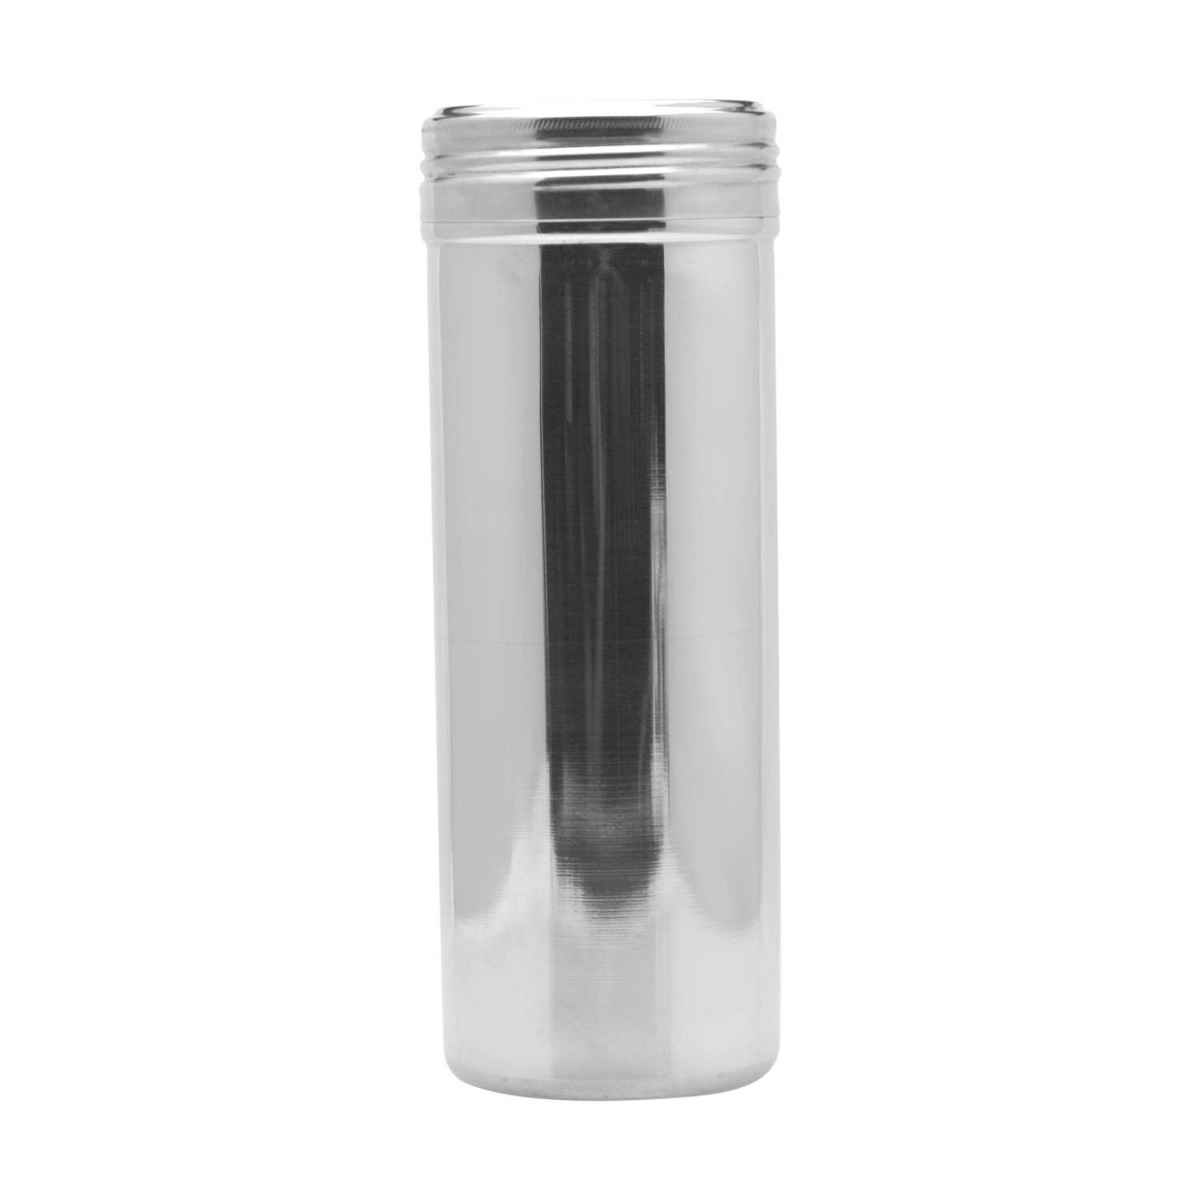 Raj Steel Spice Dispenser Without Handle